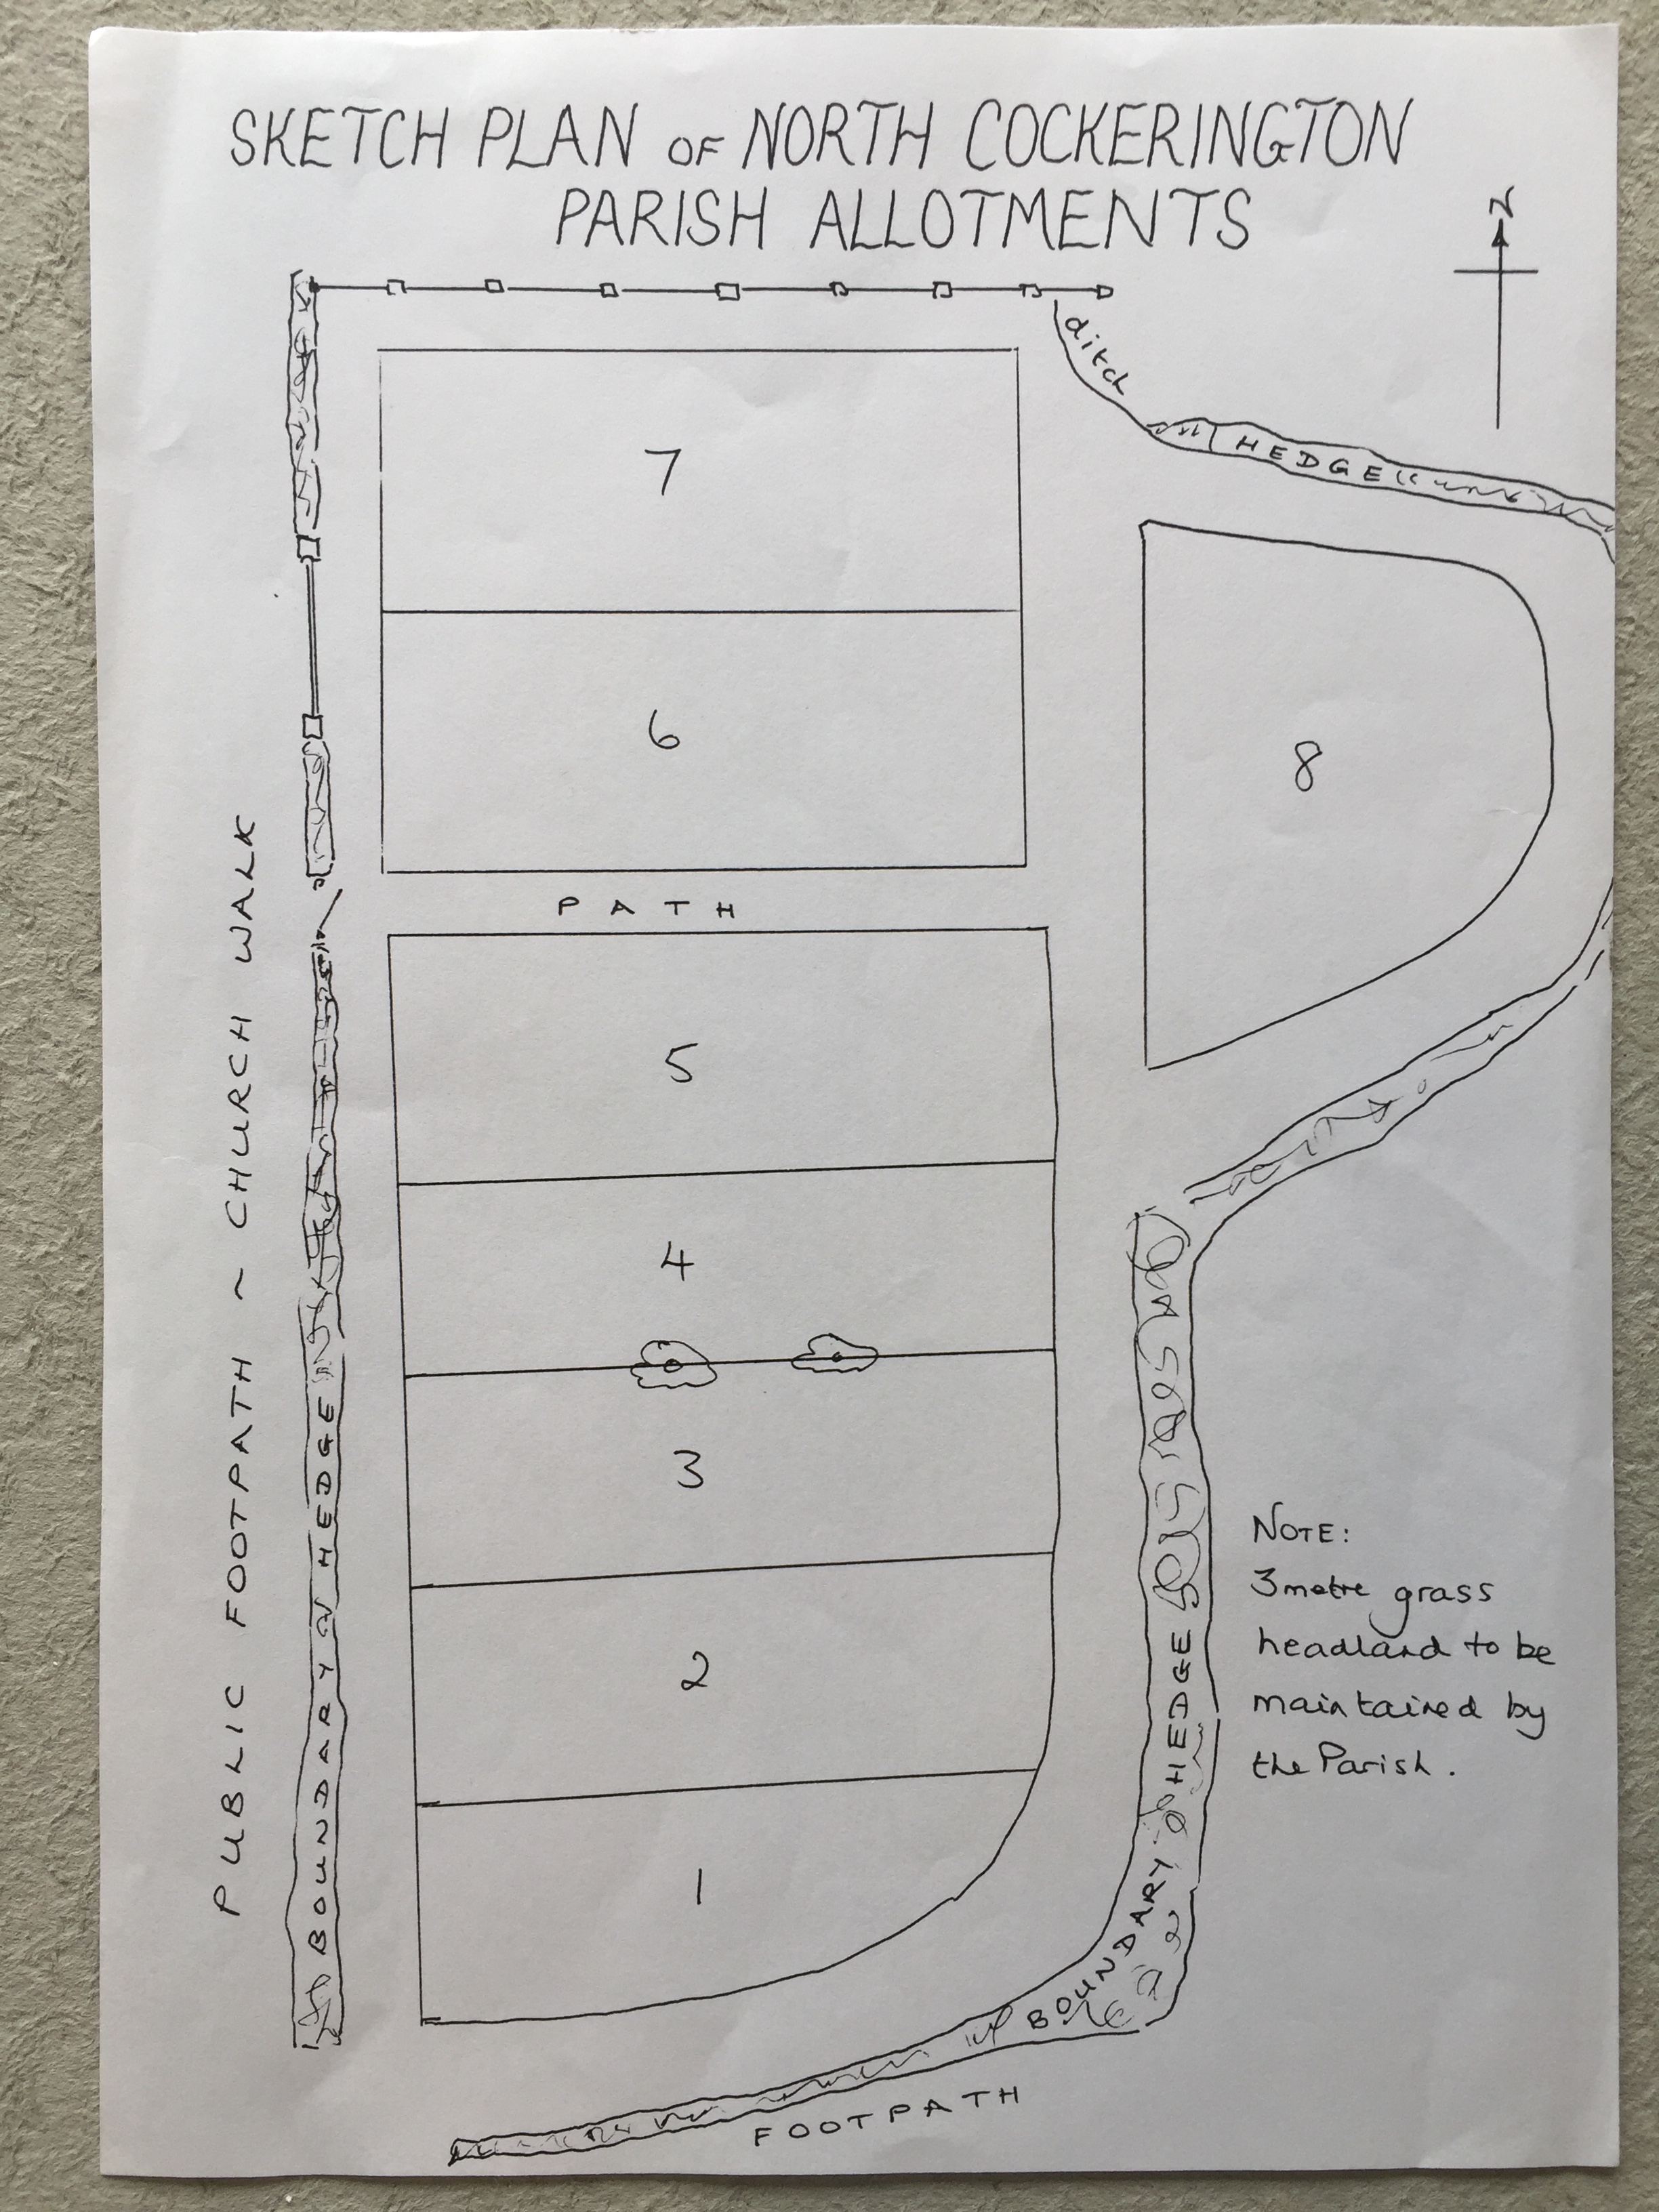 Hand drawn plan of allotments showing positions of eight plots